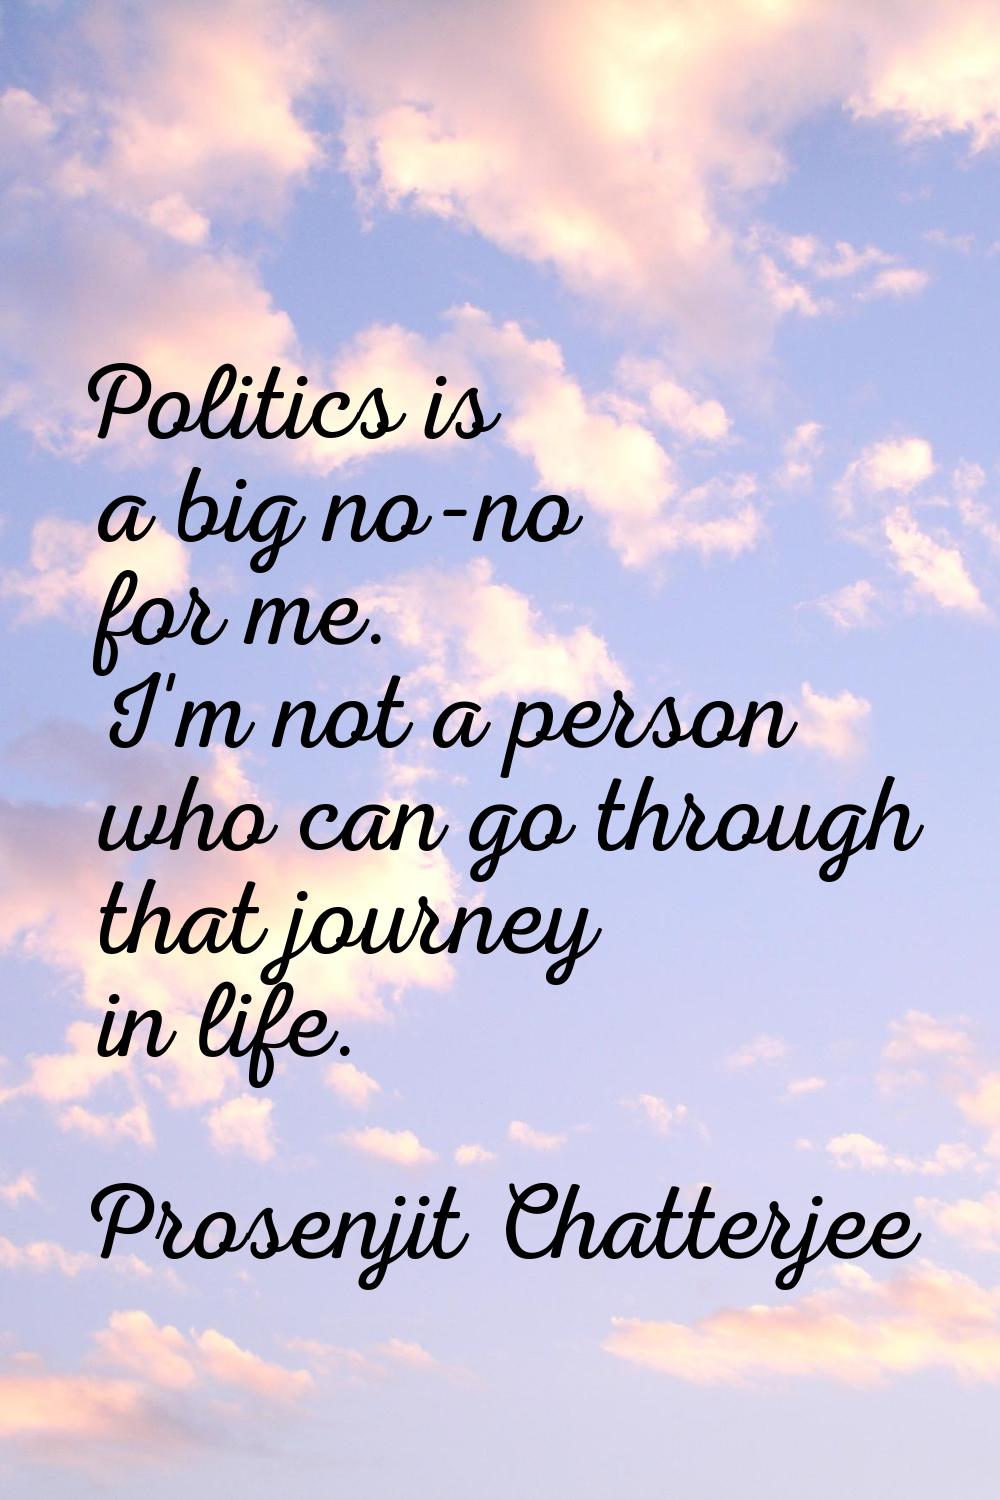 Politics is a big no-no for me. I'm not a person who can go through that journey in life.